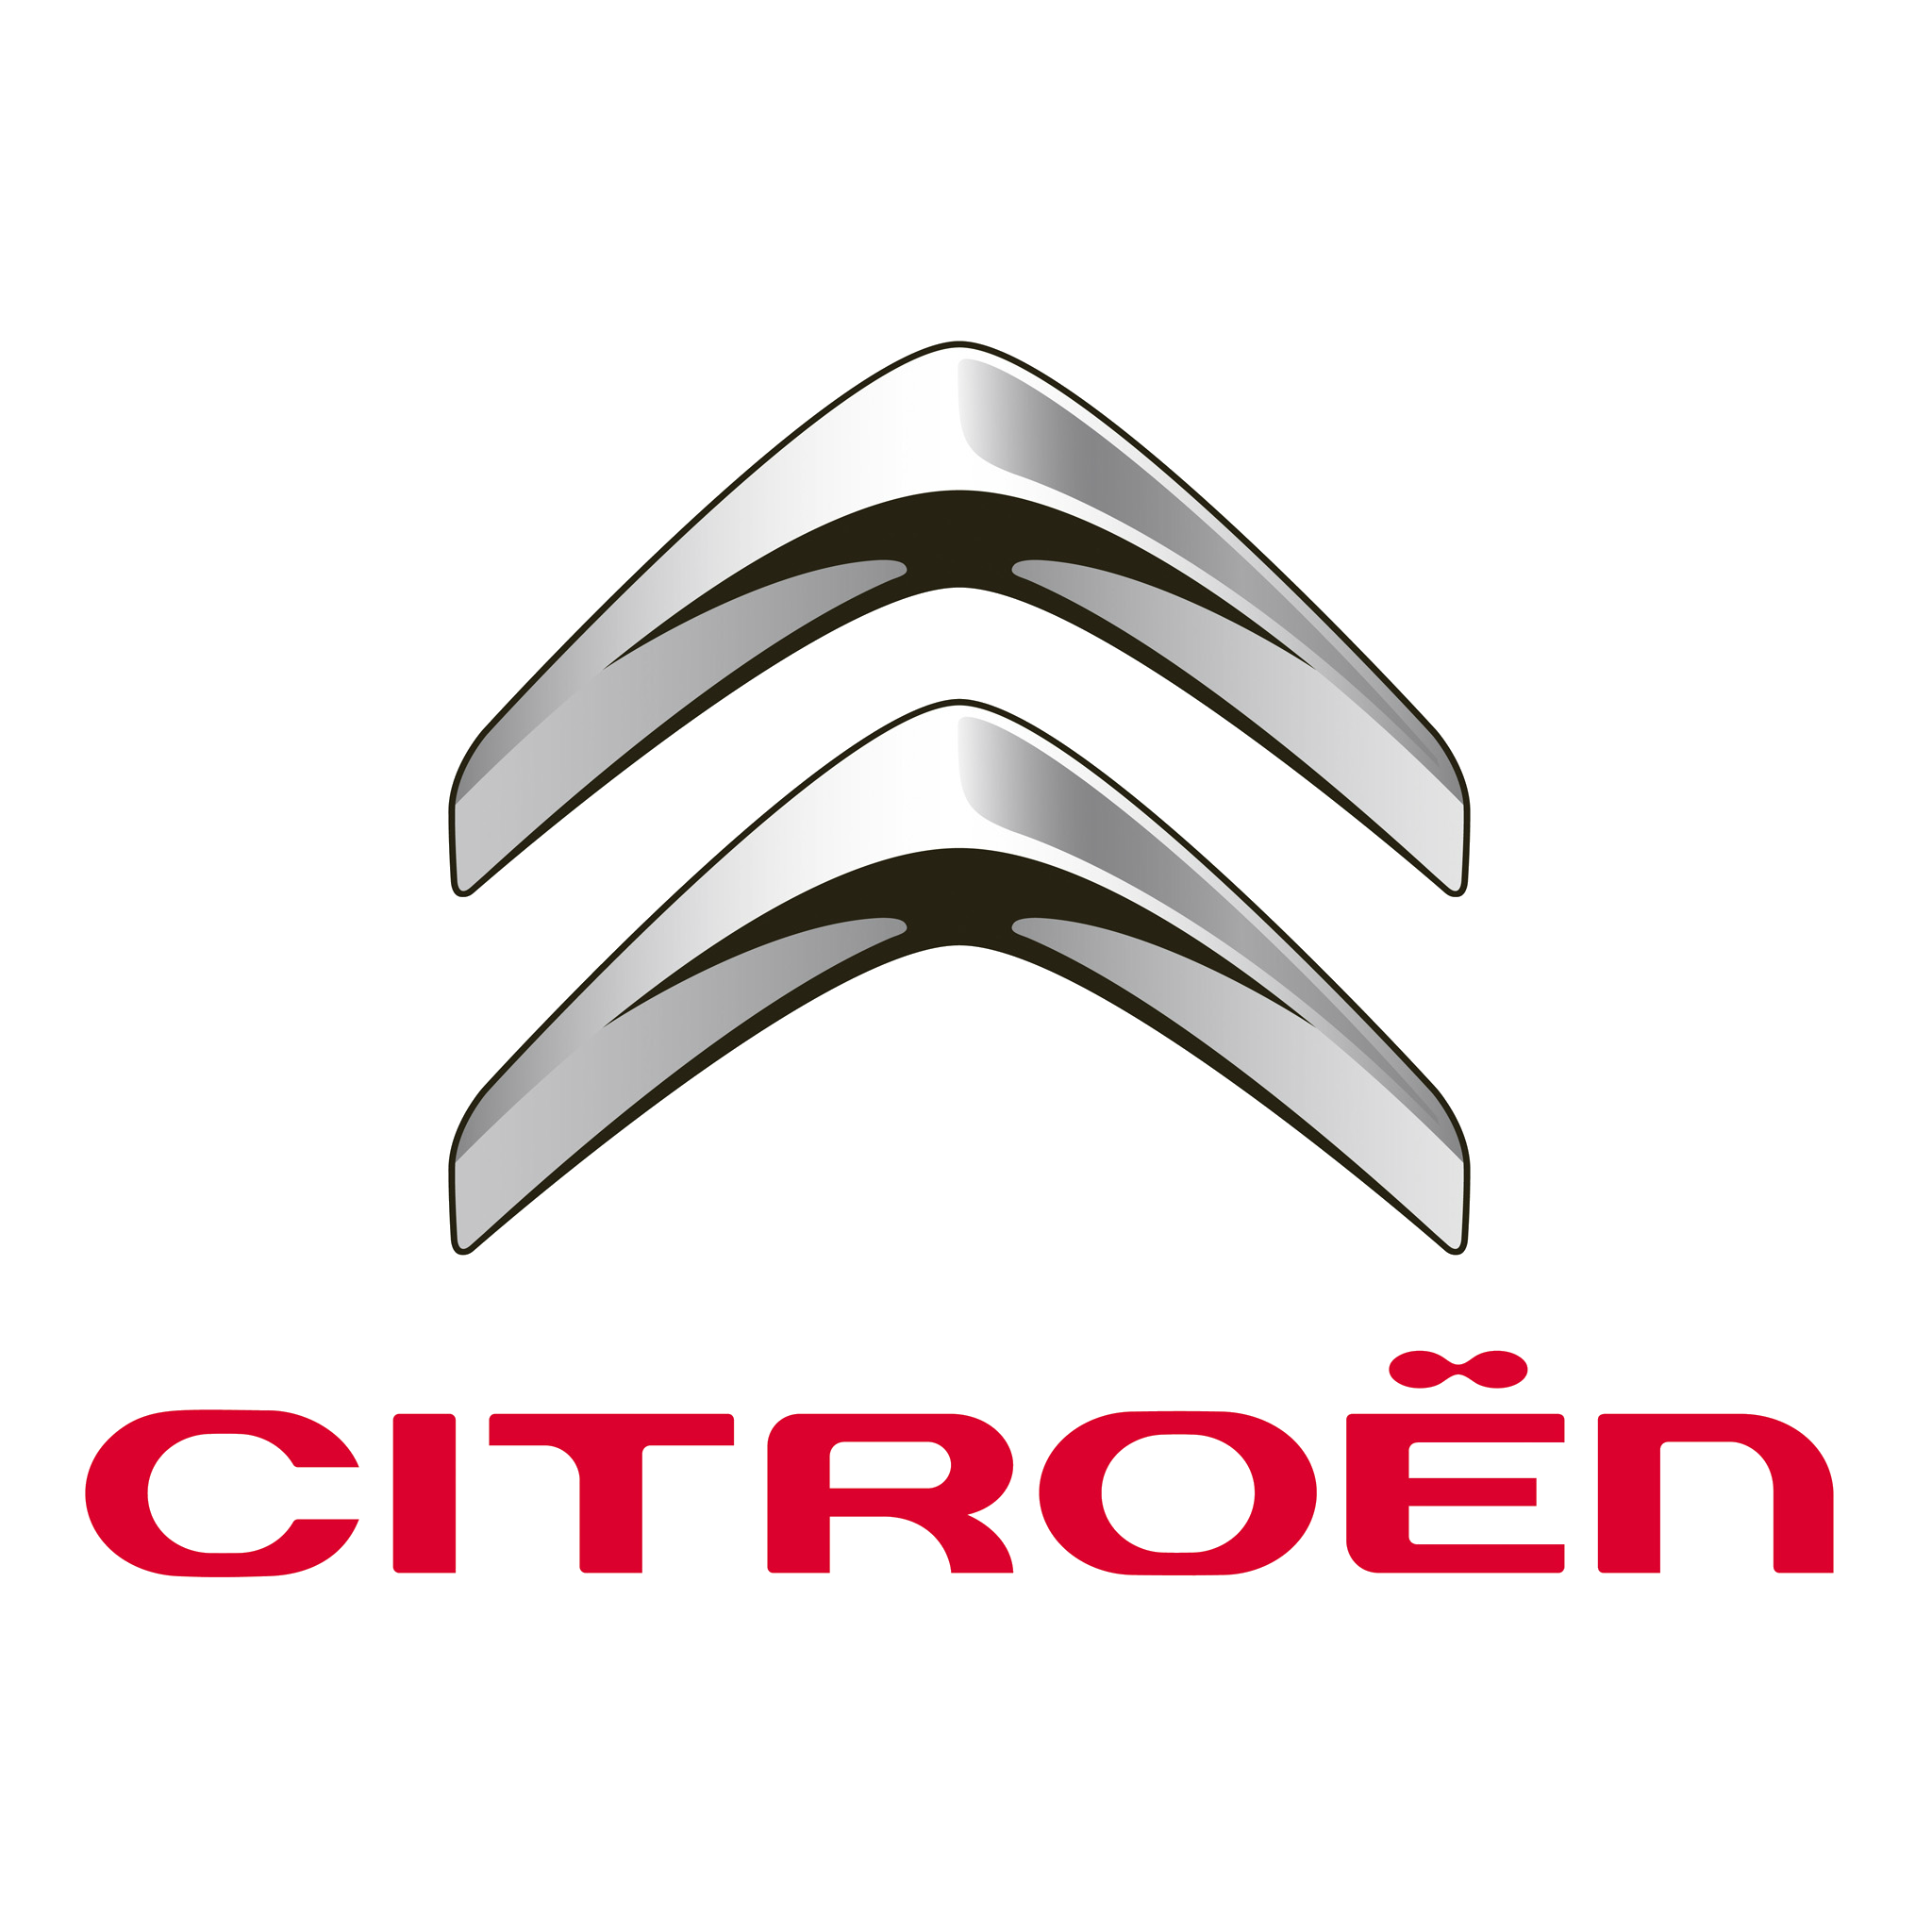 Citroen %%position|lower_without_replacement%%